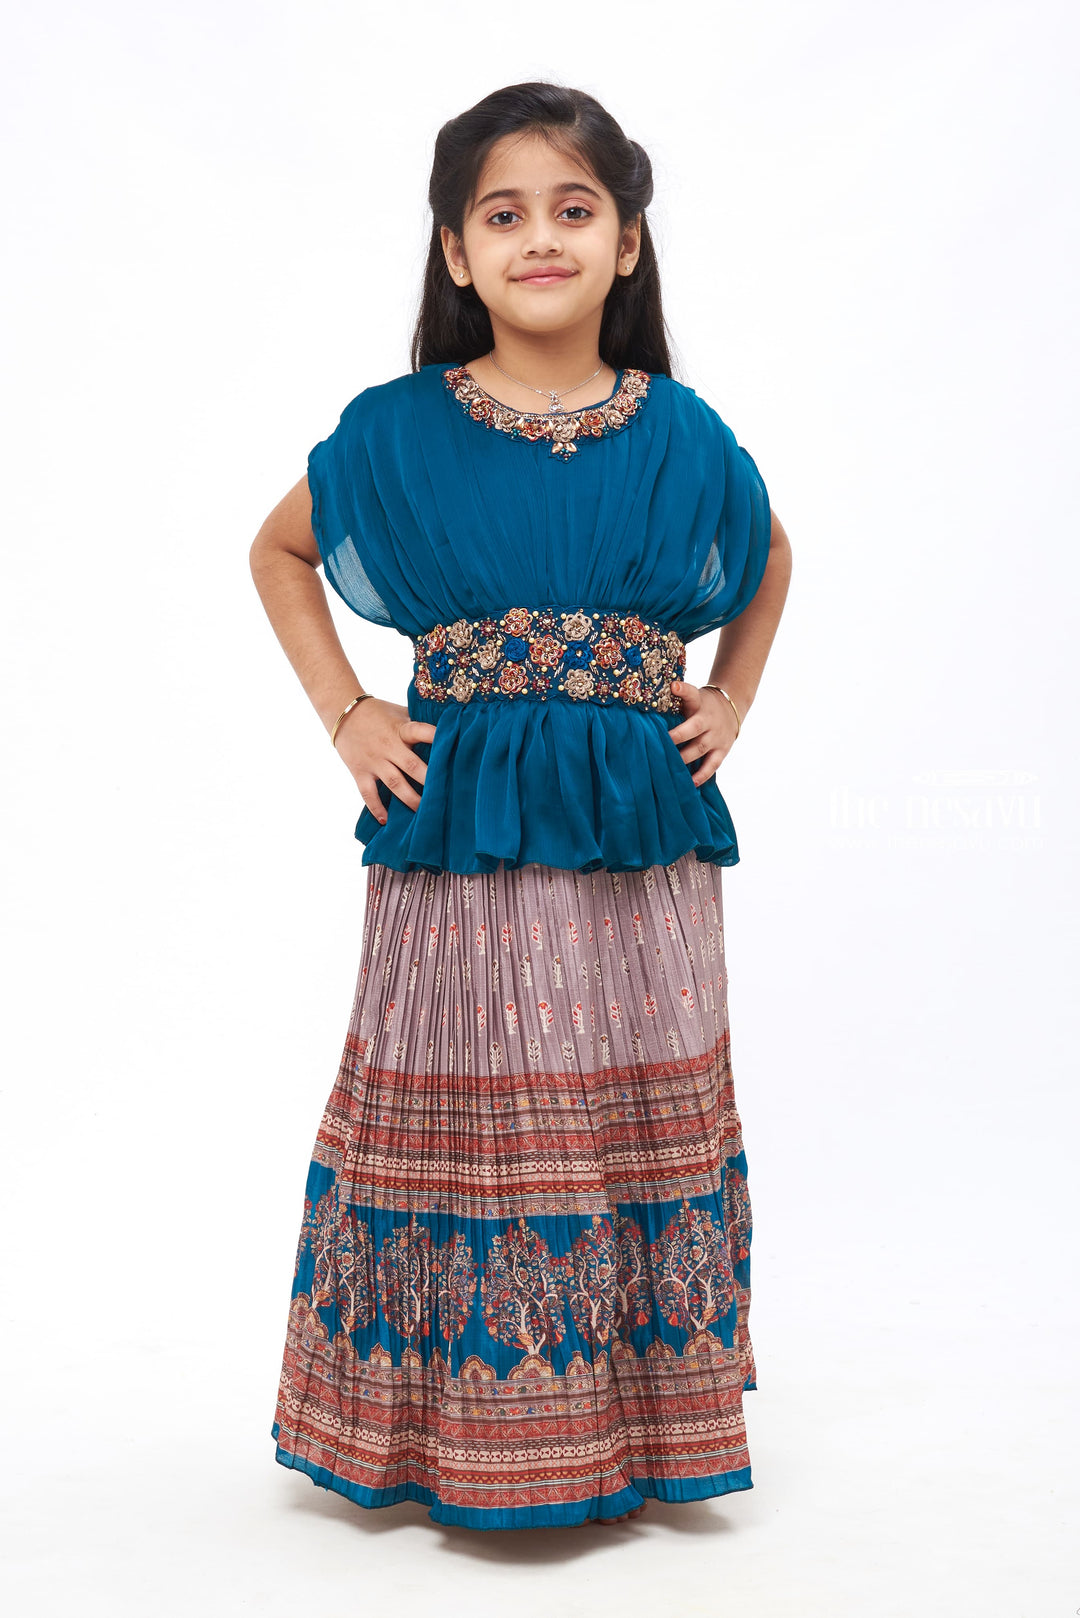 The Nesavu Girls Party Gown Emerald Elegance: Girls Full-Length Anarkali Gown with Ornate Embroidery and Printed Flare Nesavu 24 (5Y) / Green / Chinnon GA162A-24 Latest Anarkali Gown Designs | Girls' Traditional Anarkali Gowns | The Nesavu